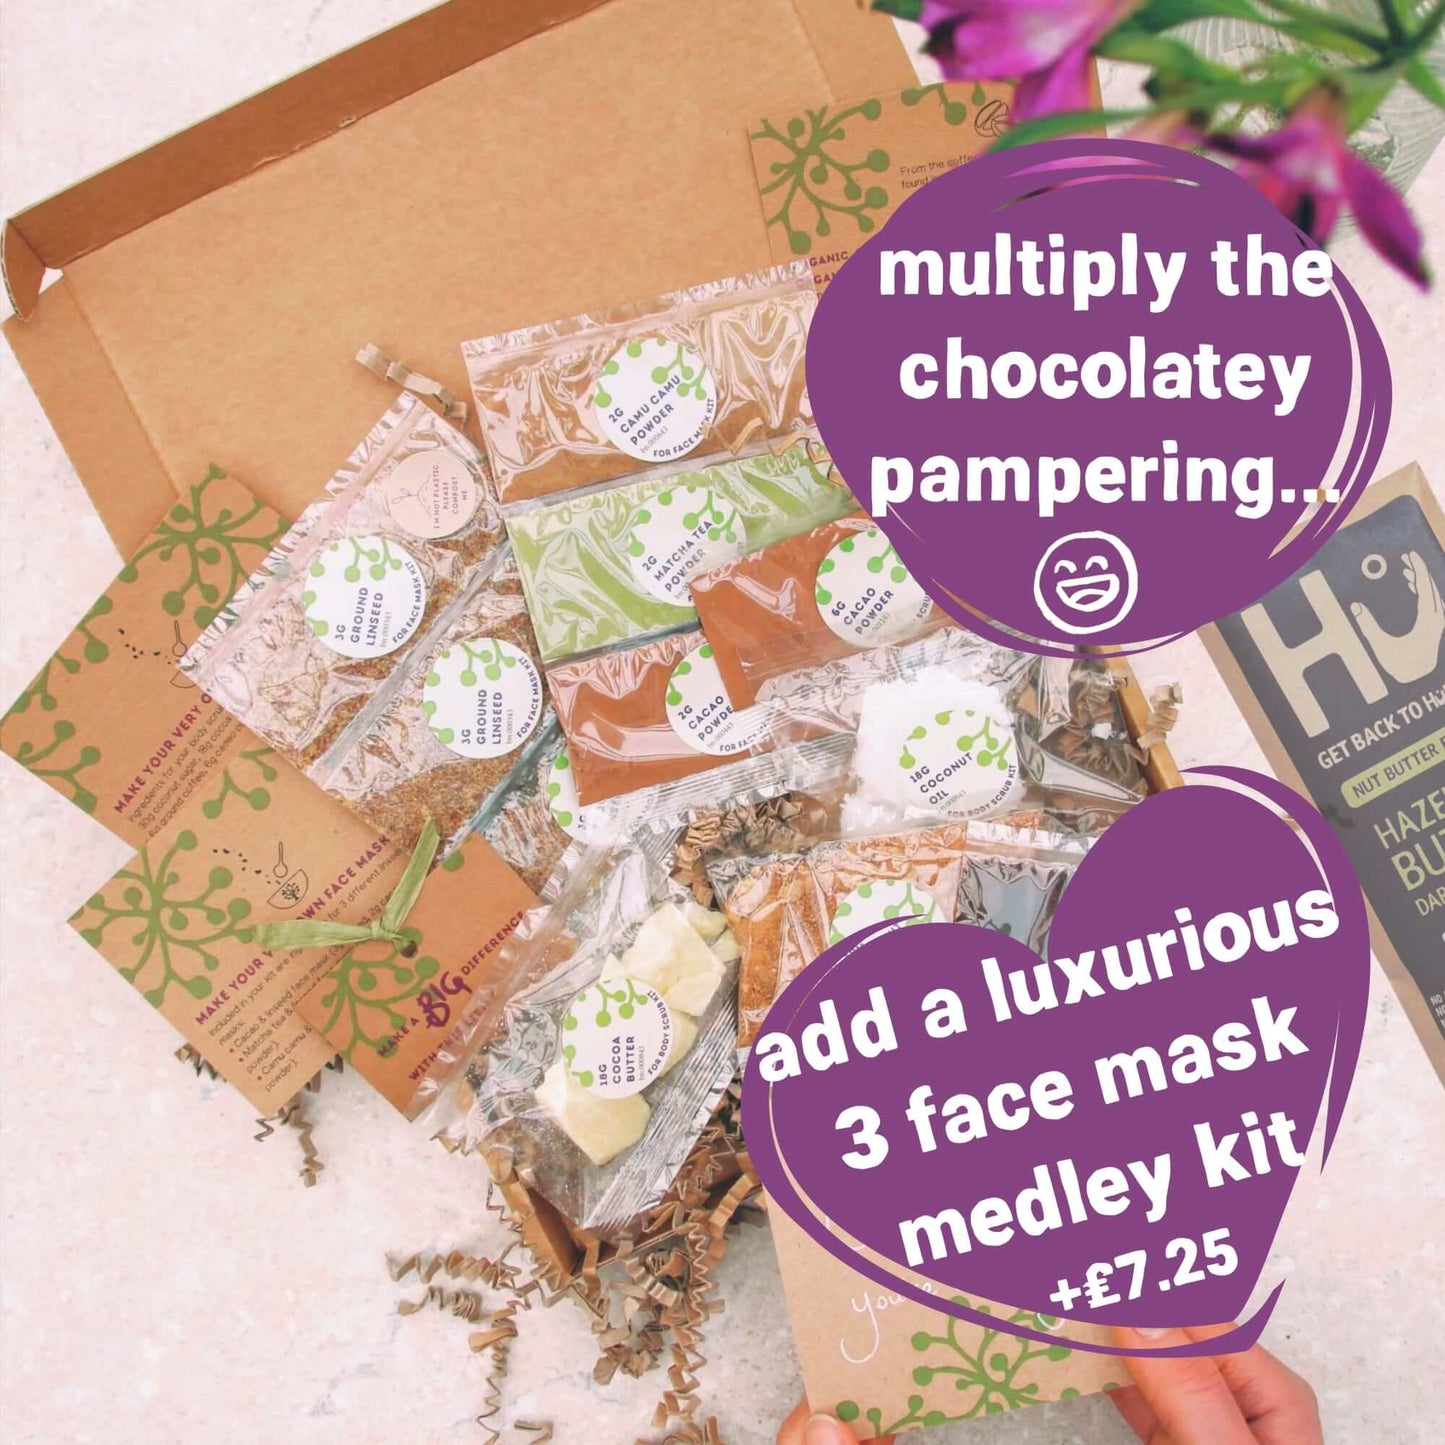 add 3 eco-friendly face mask kits to 30th birthday gift box